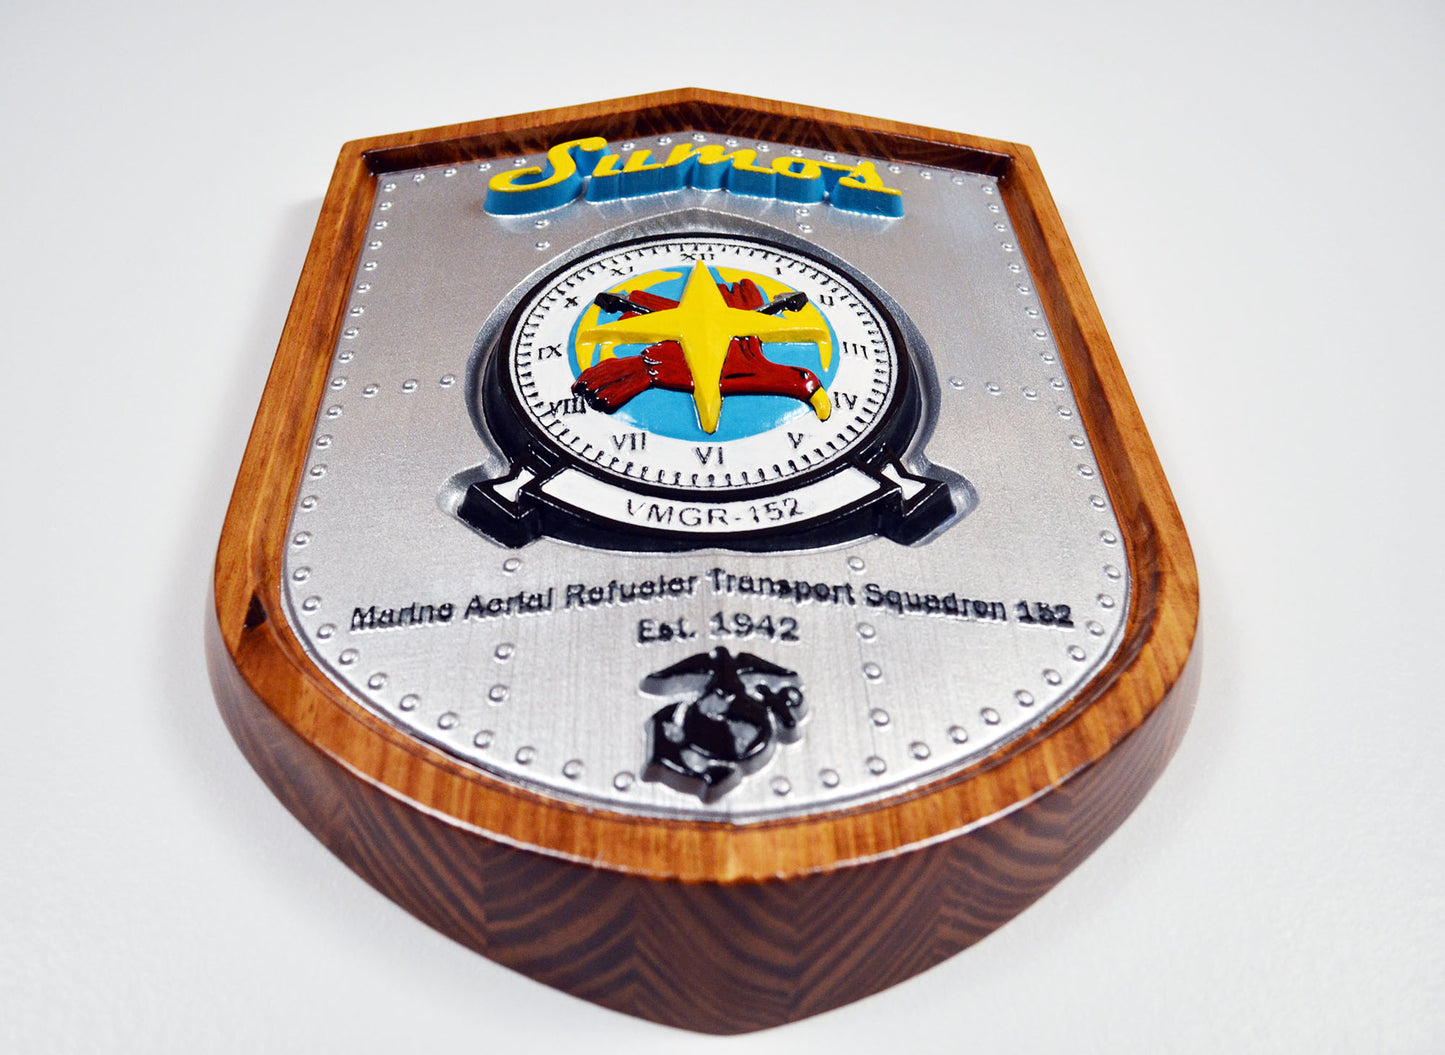 USMC VMGR-152 Marine Aerial Refueler Squadron, Sumos Marine Corps, 3d wood carving military plaque painted version